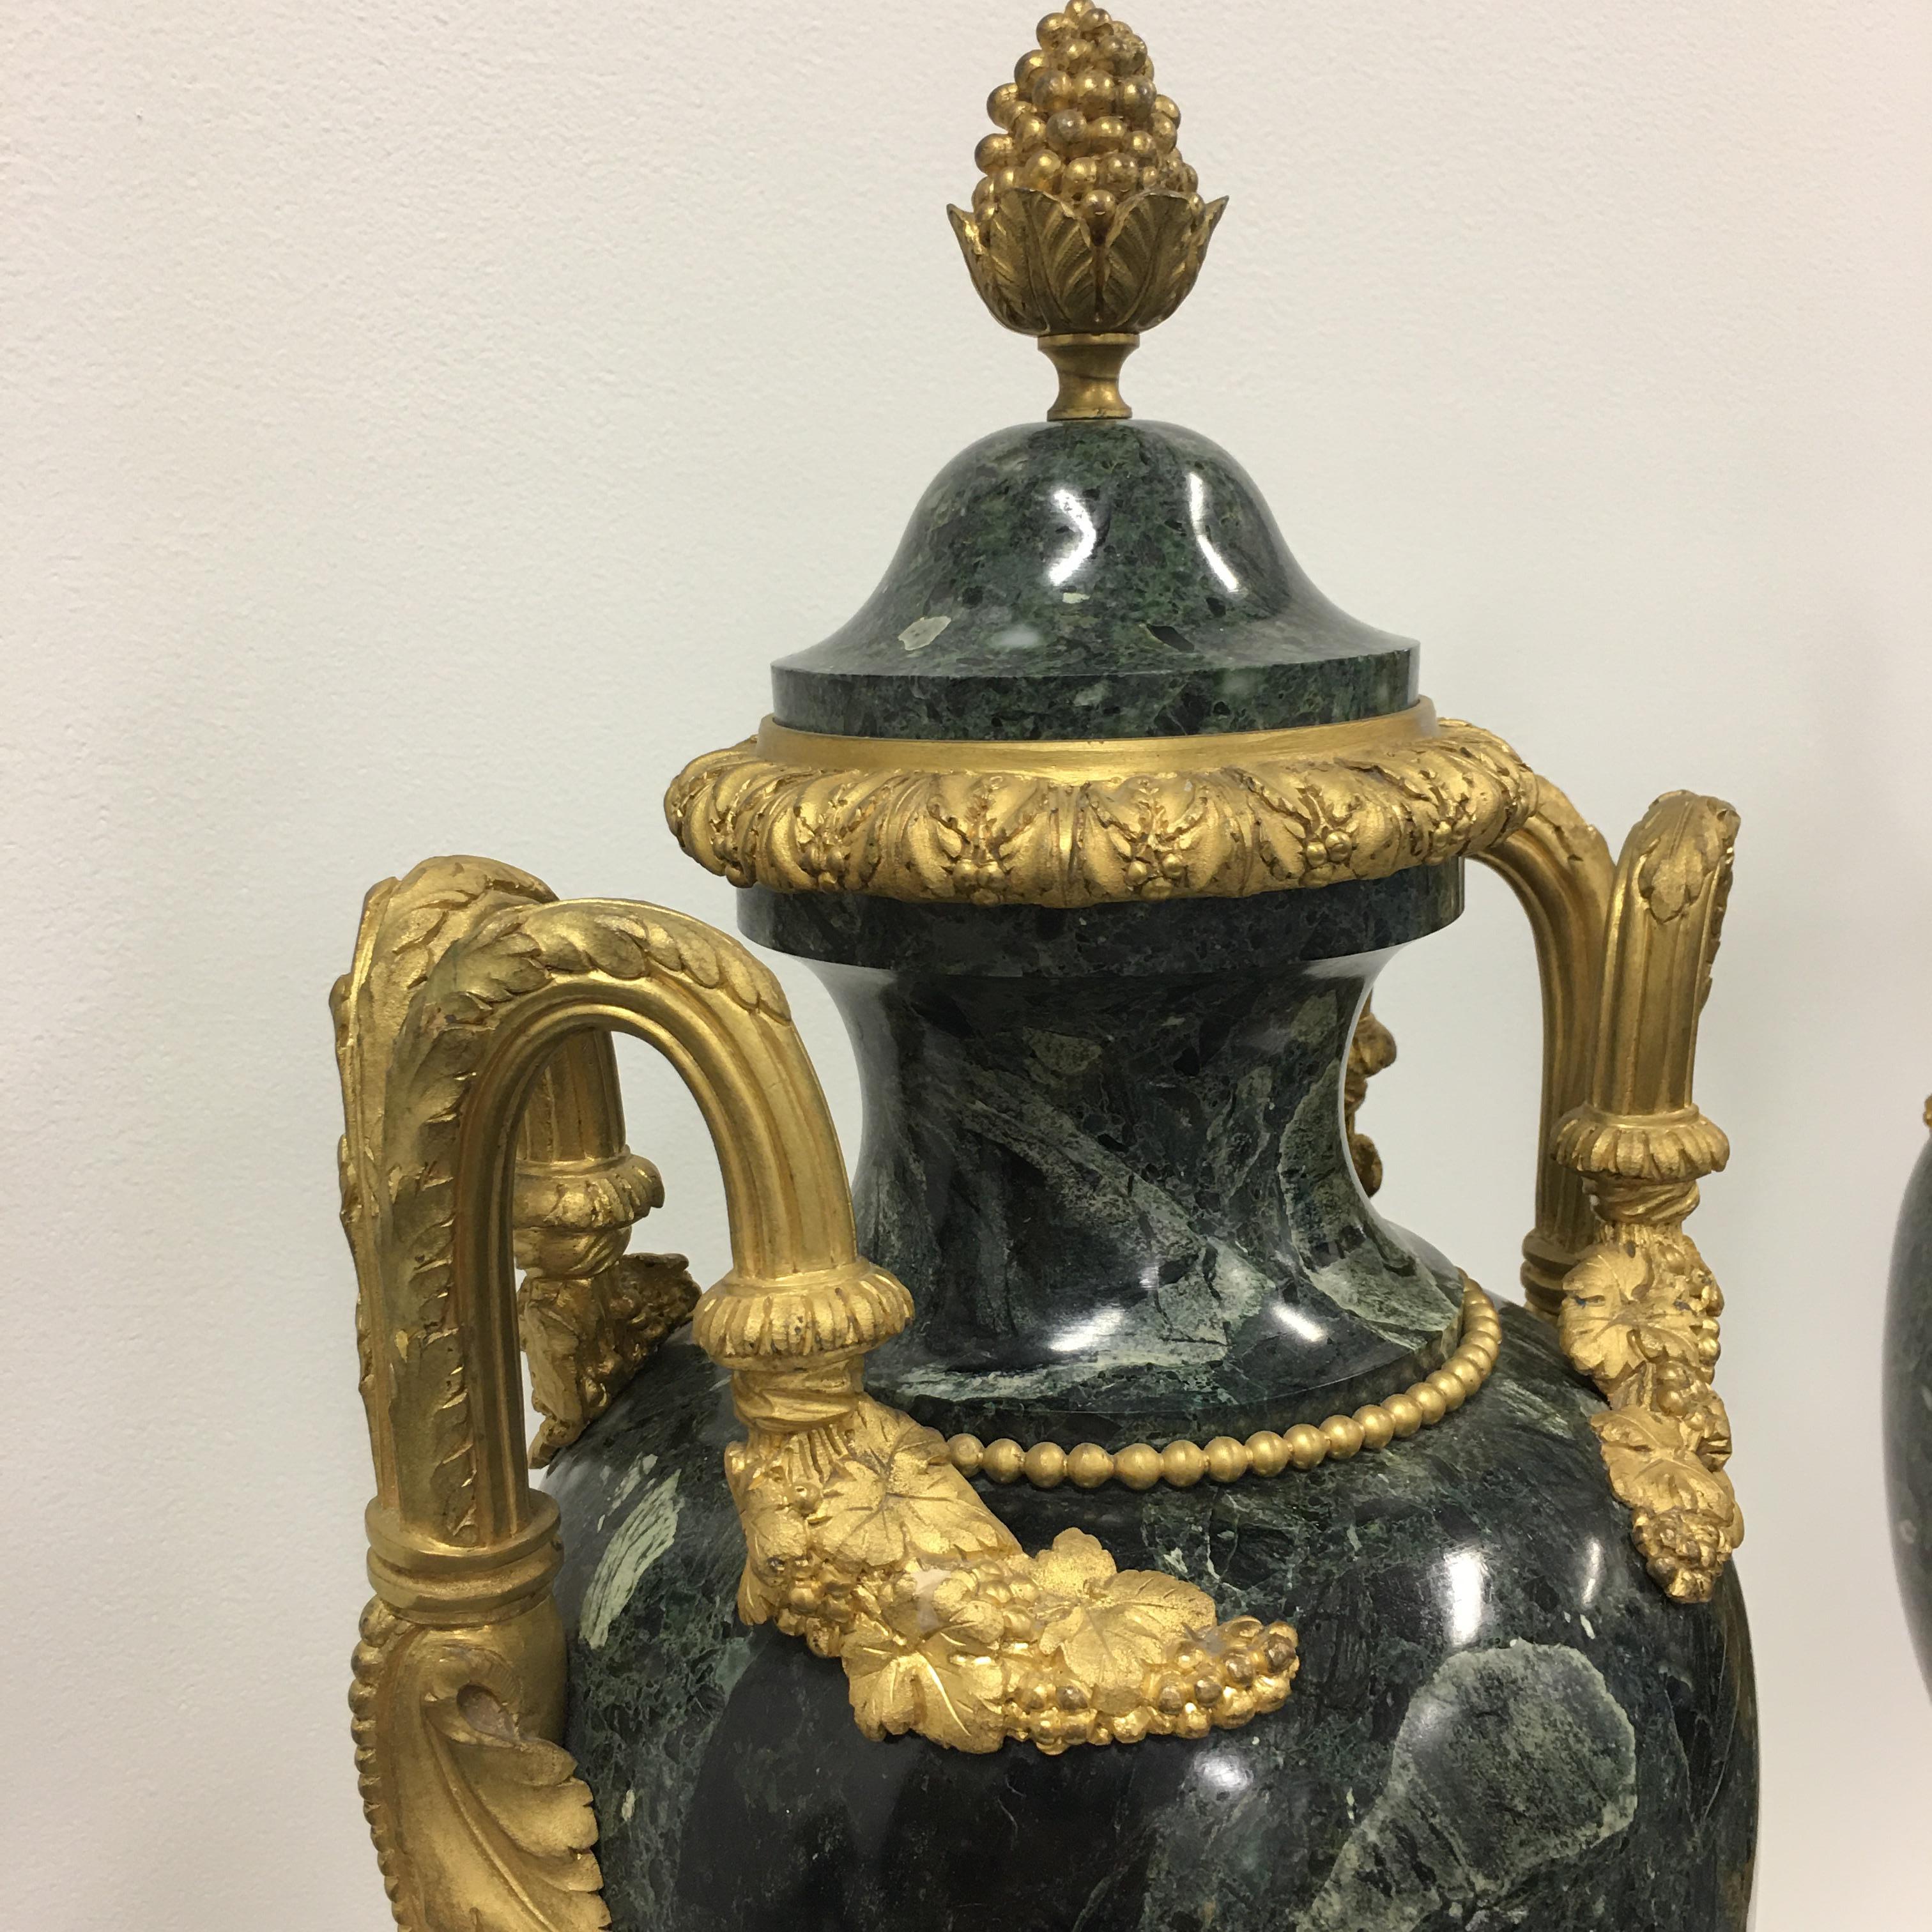 A stunning and very high quality pair of 19th. century Palace proportion Louis XVI St. Le Belle Epoque period (1871/ 80- 194 )
Vert De Patricia Marble and ormolu lidded urns. Each urn is raised by a square Vert De Patricia marble base trimmed with